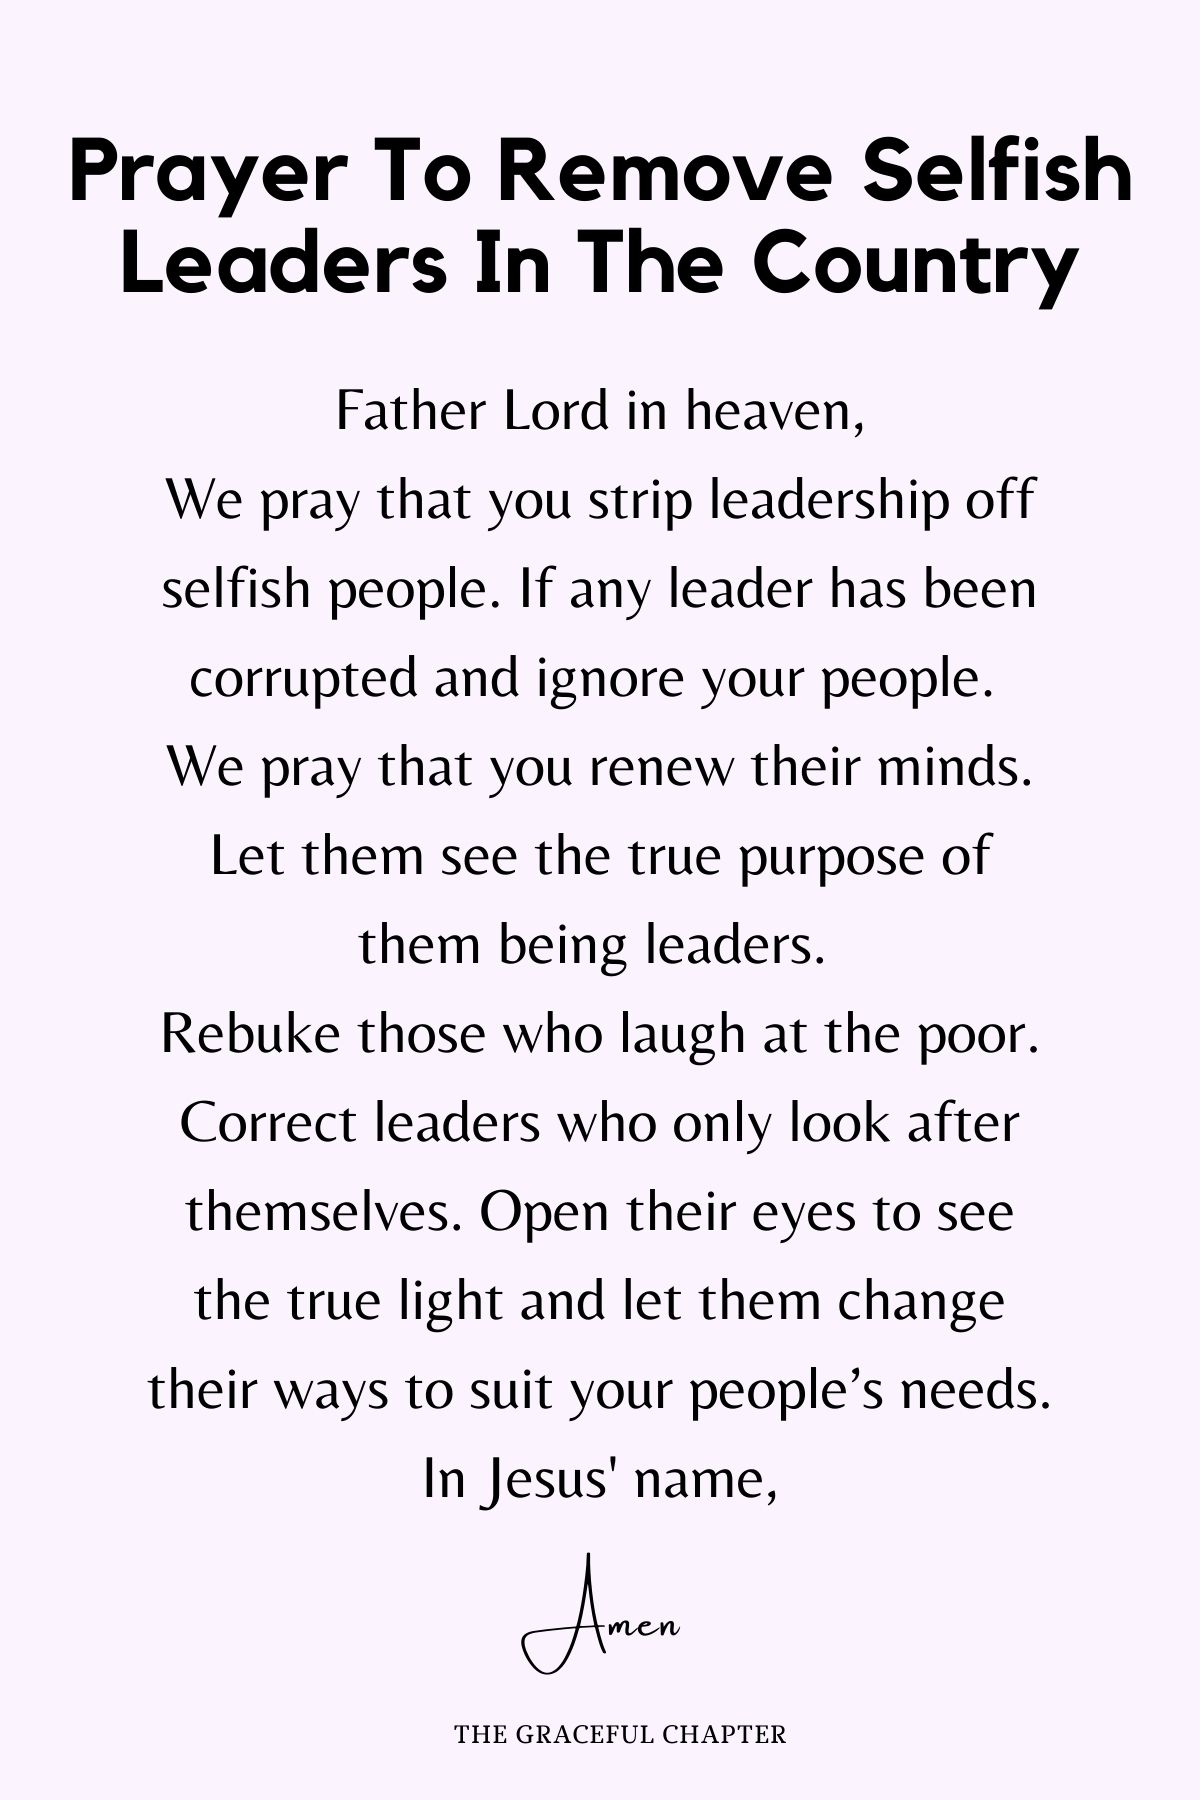 Prayer to remove selfish leaders in the country